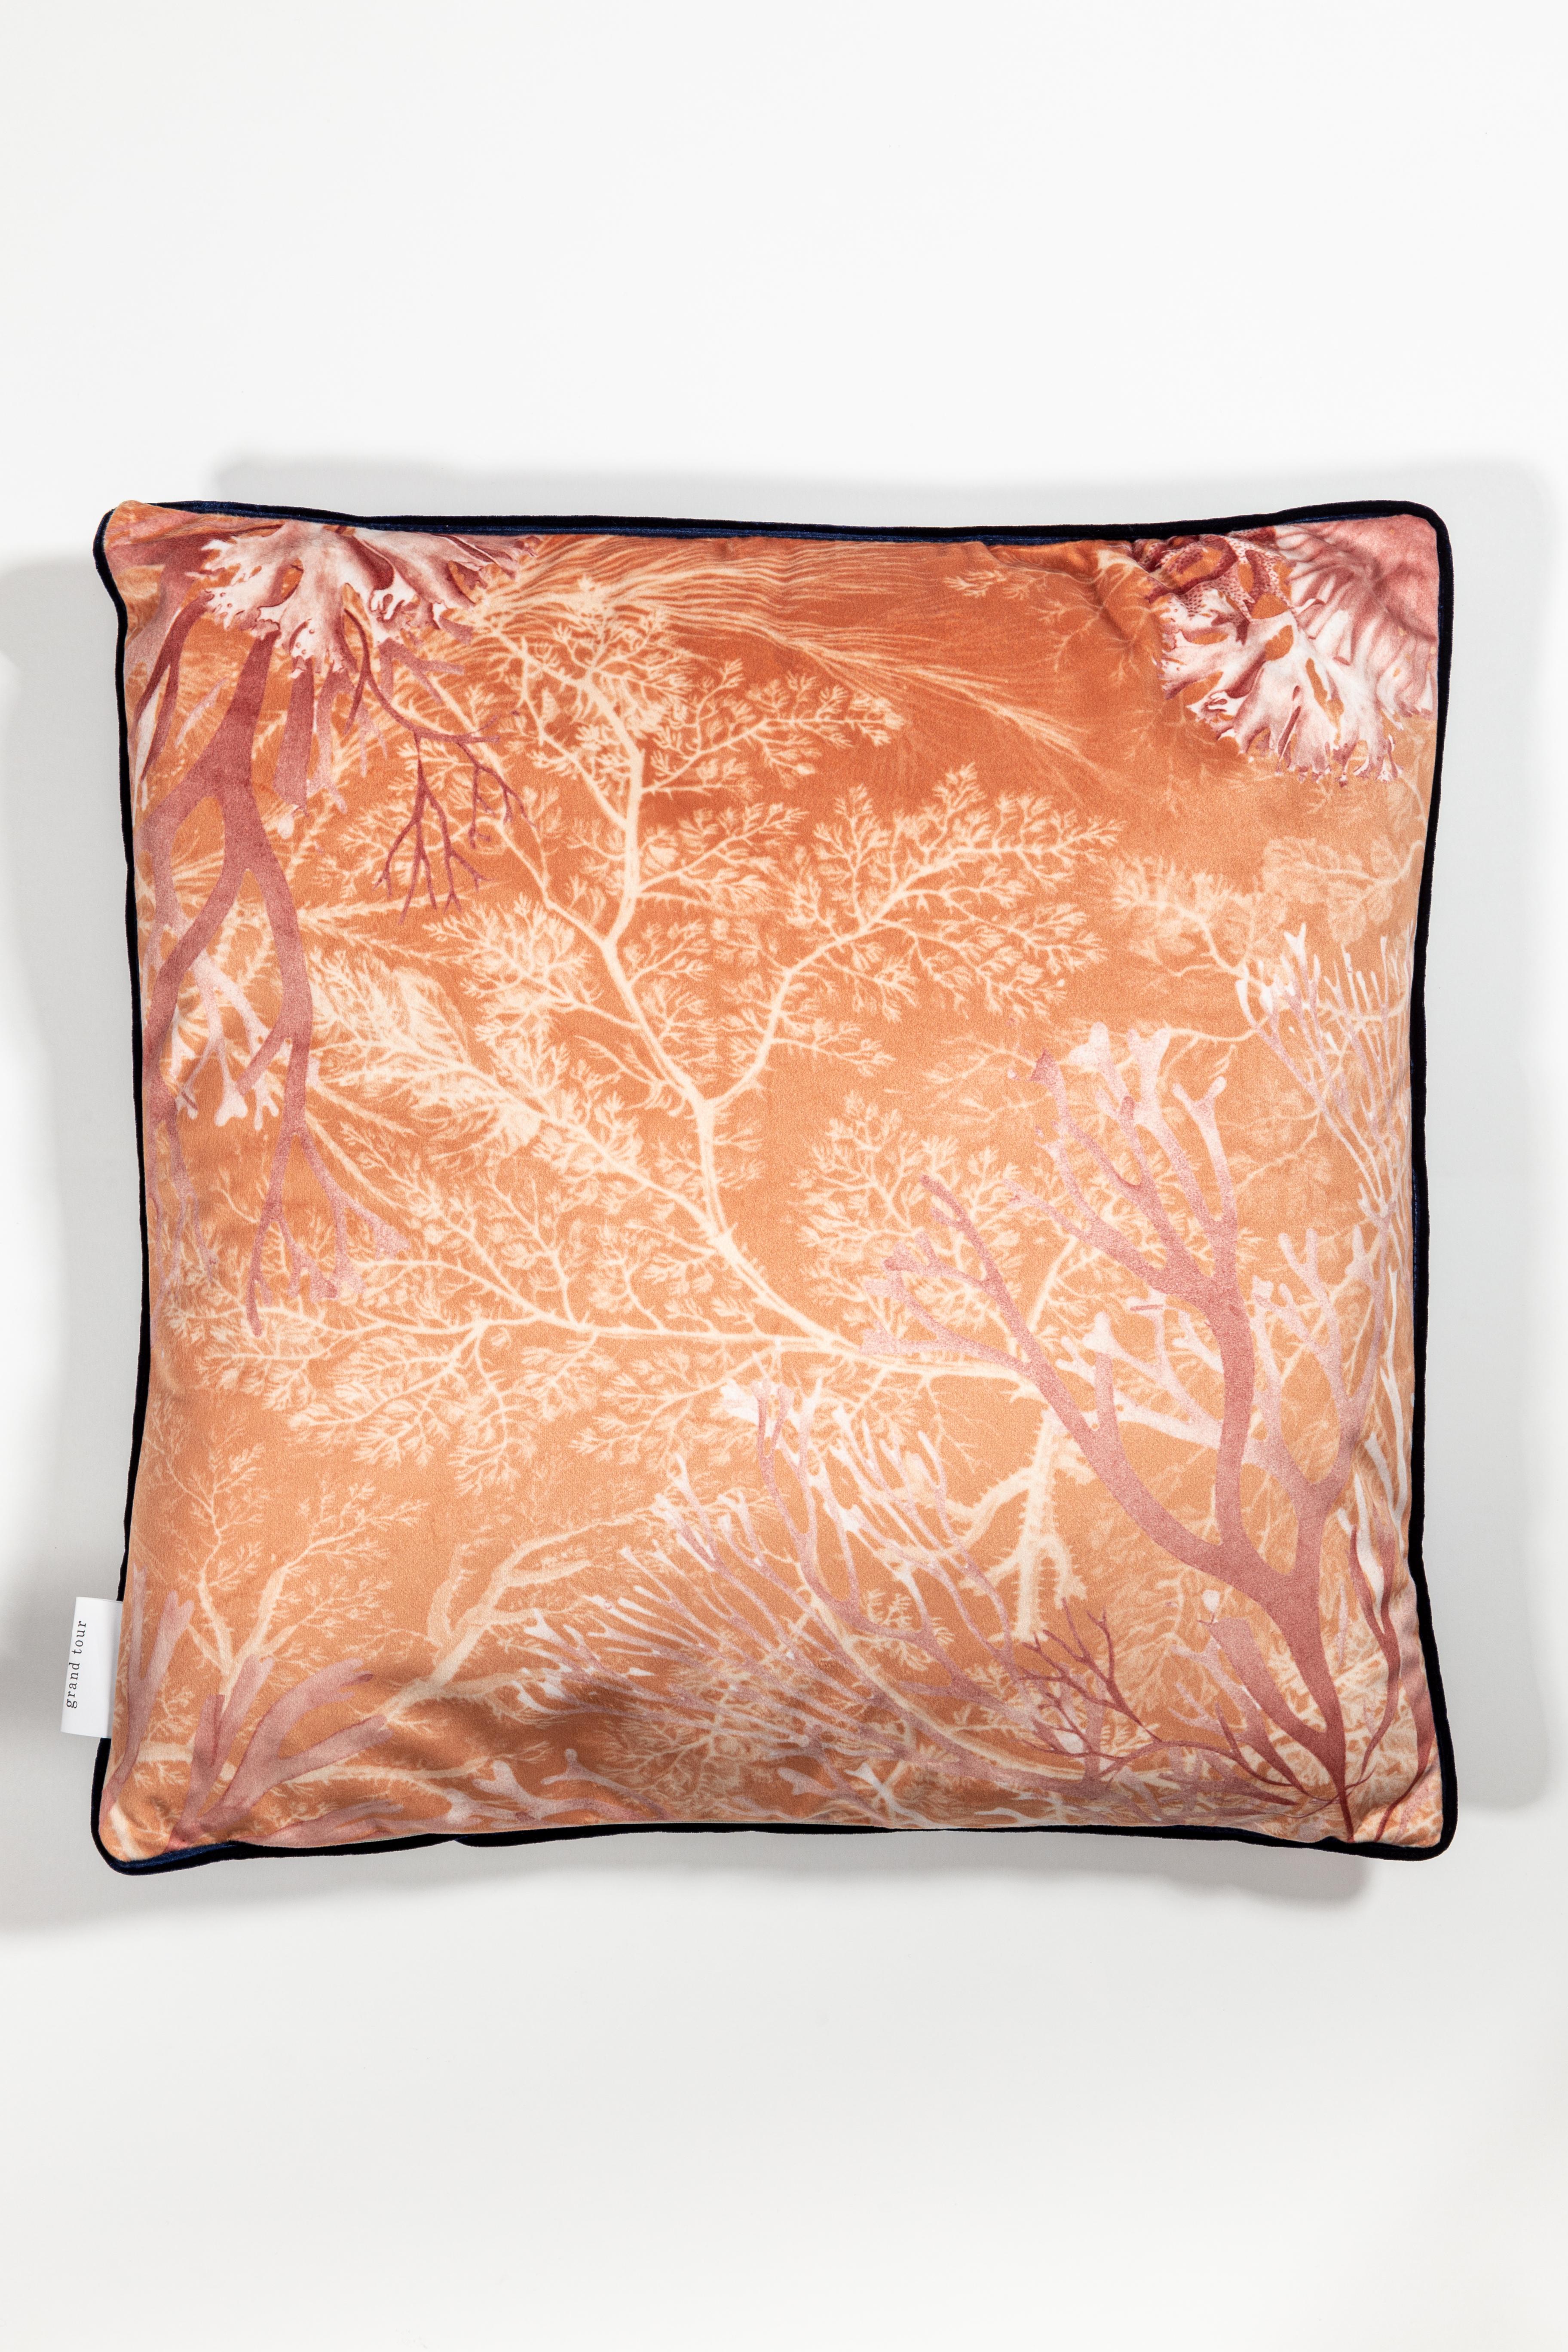 Amami pillows is a set of cushions inspired by the coral reef of the Amami Islands, near Japan. This coral reef has recently bleached, these pillows wants to be a remind of how powerful and beautiful the underwater world is when is healthy and